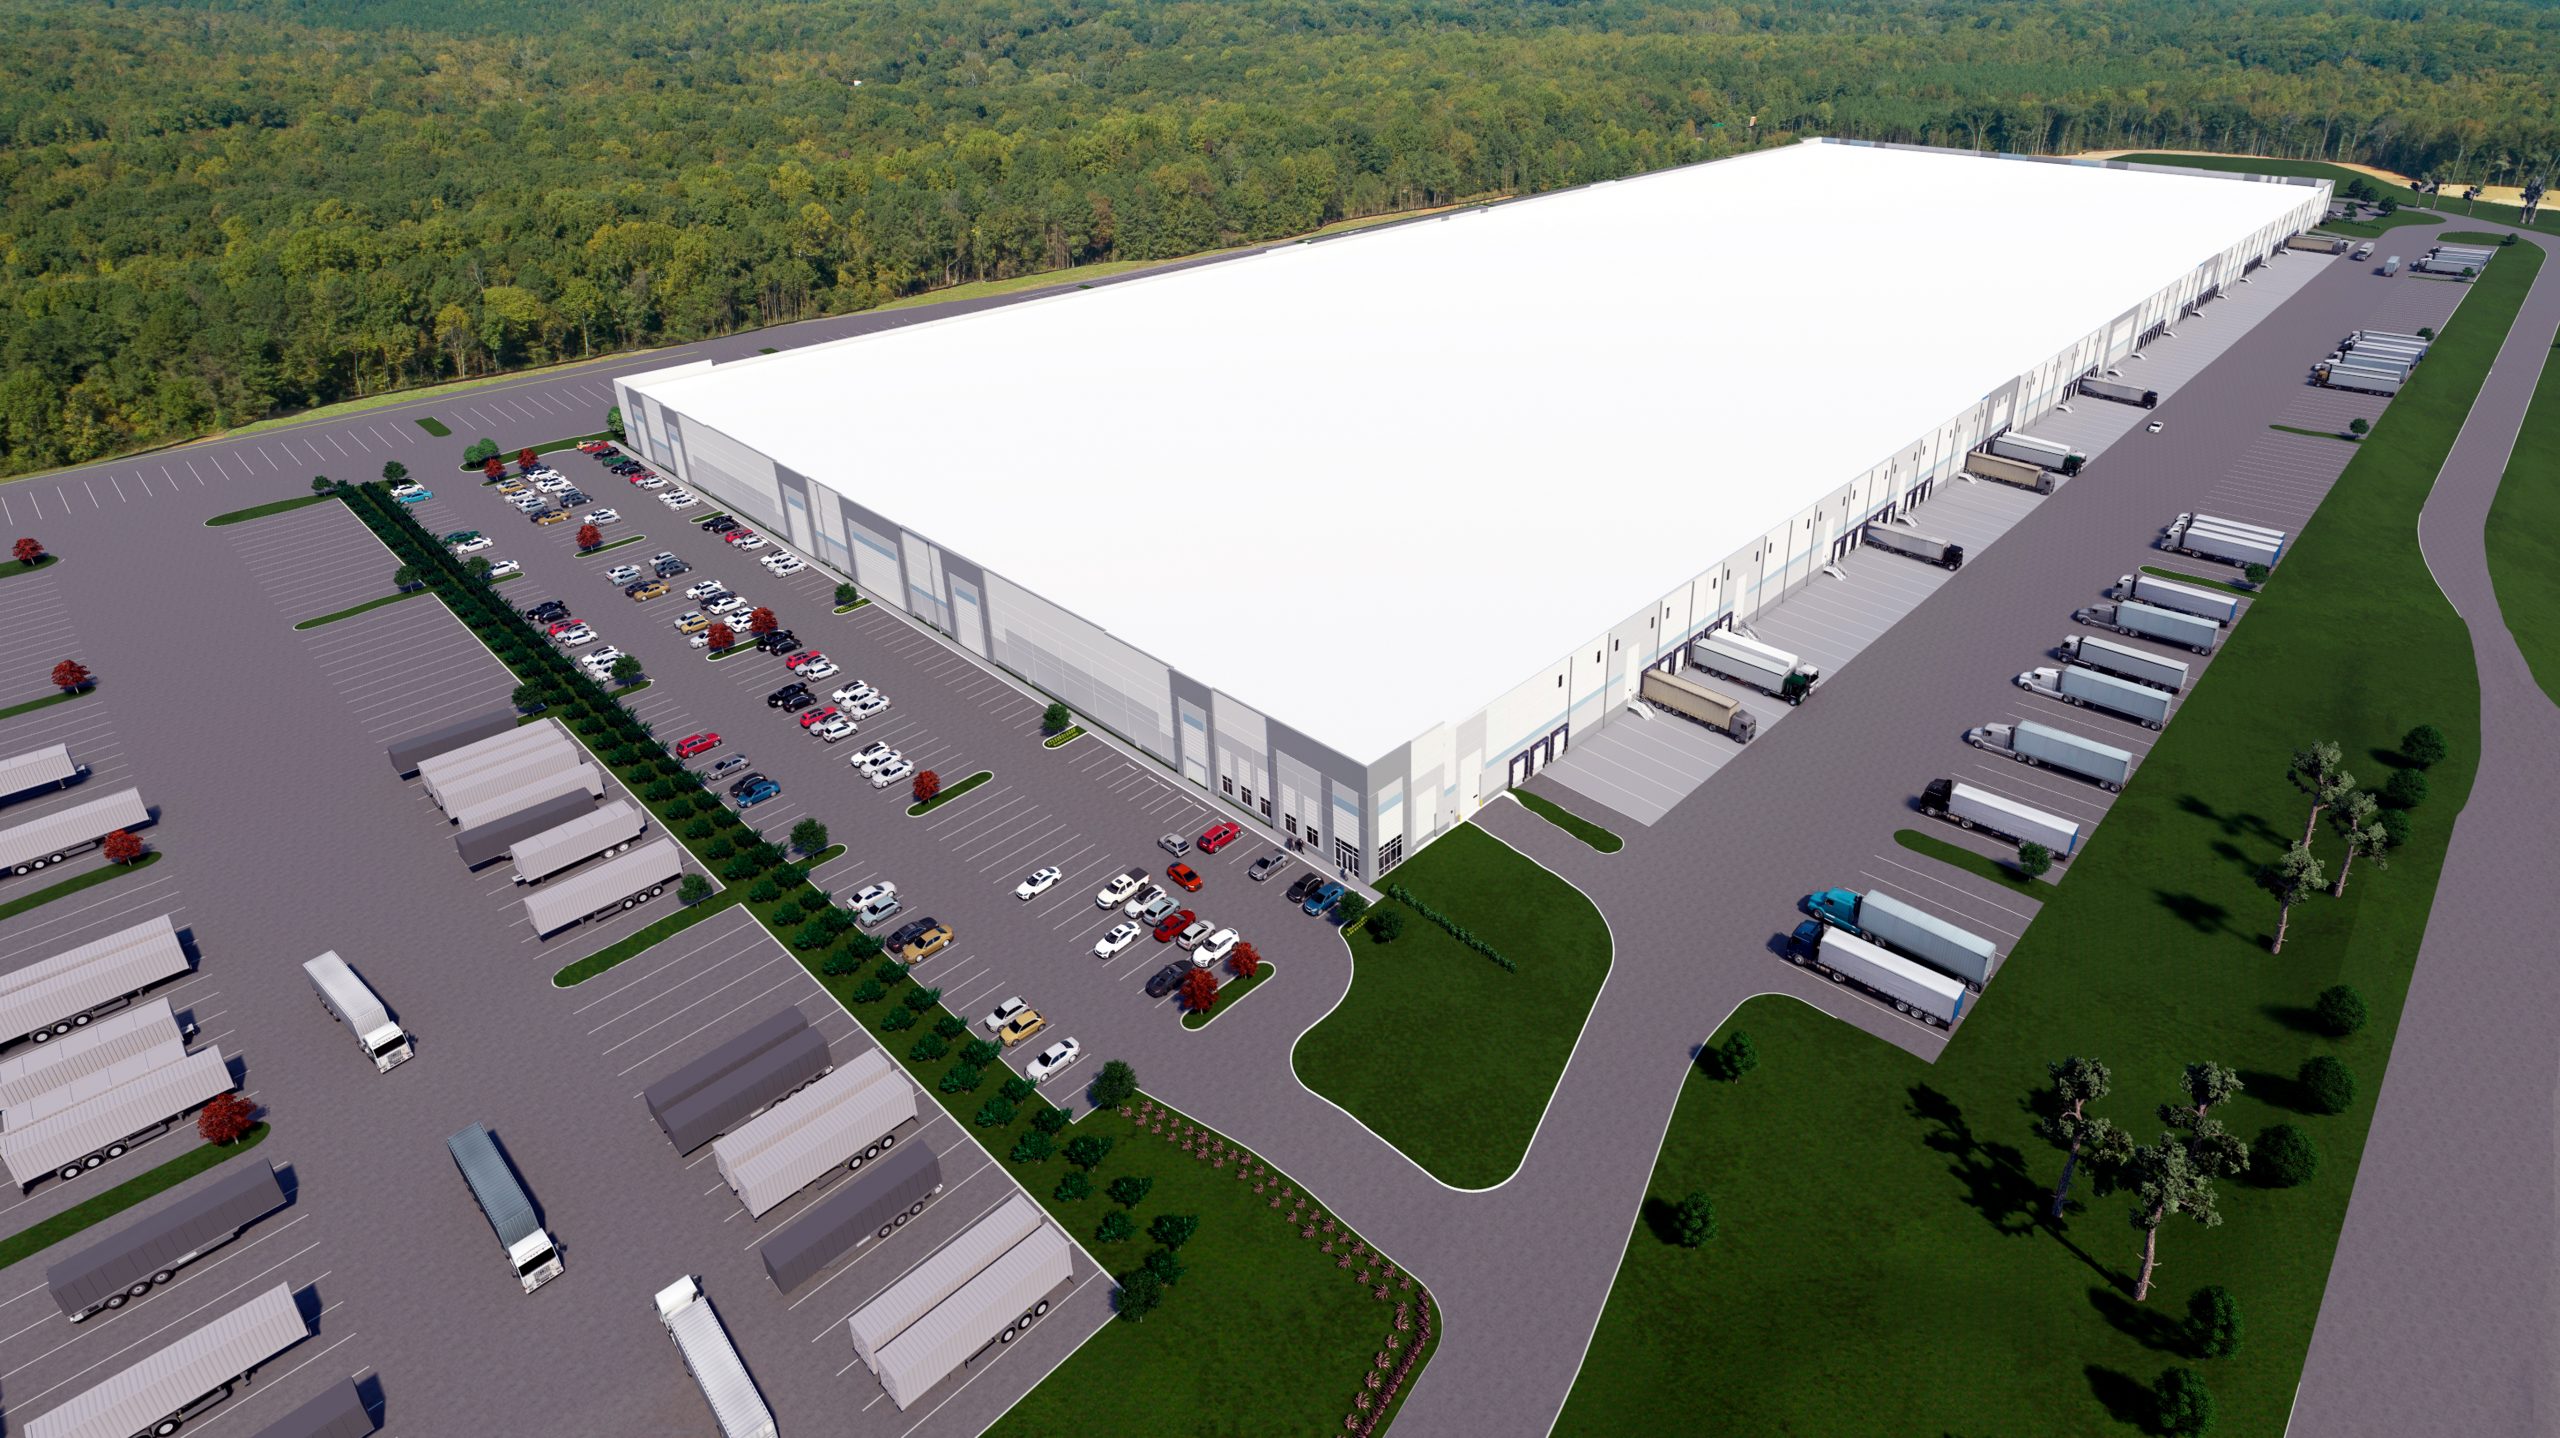  Construction starts on $100M industrial center in Hanover 